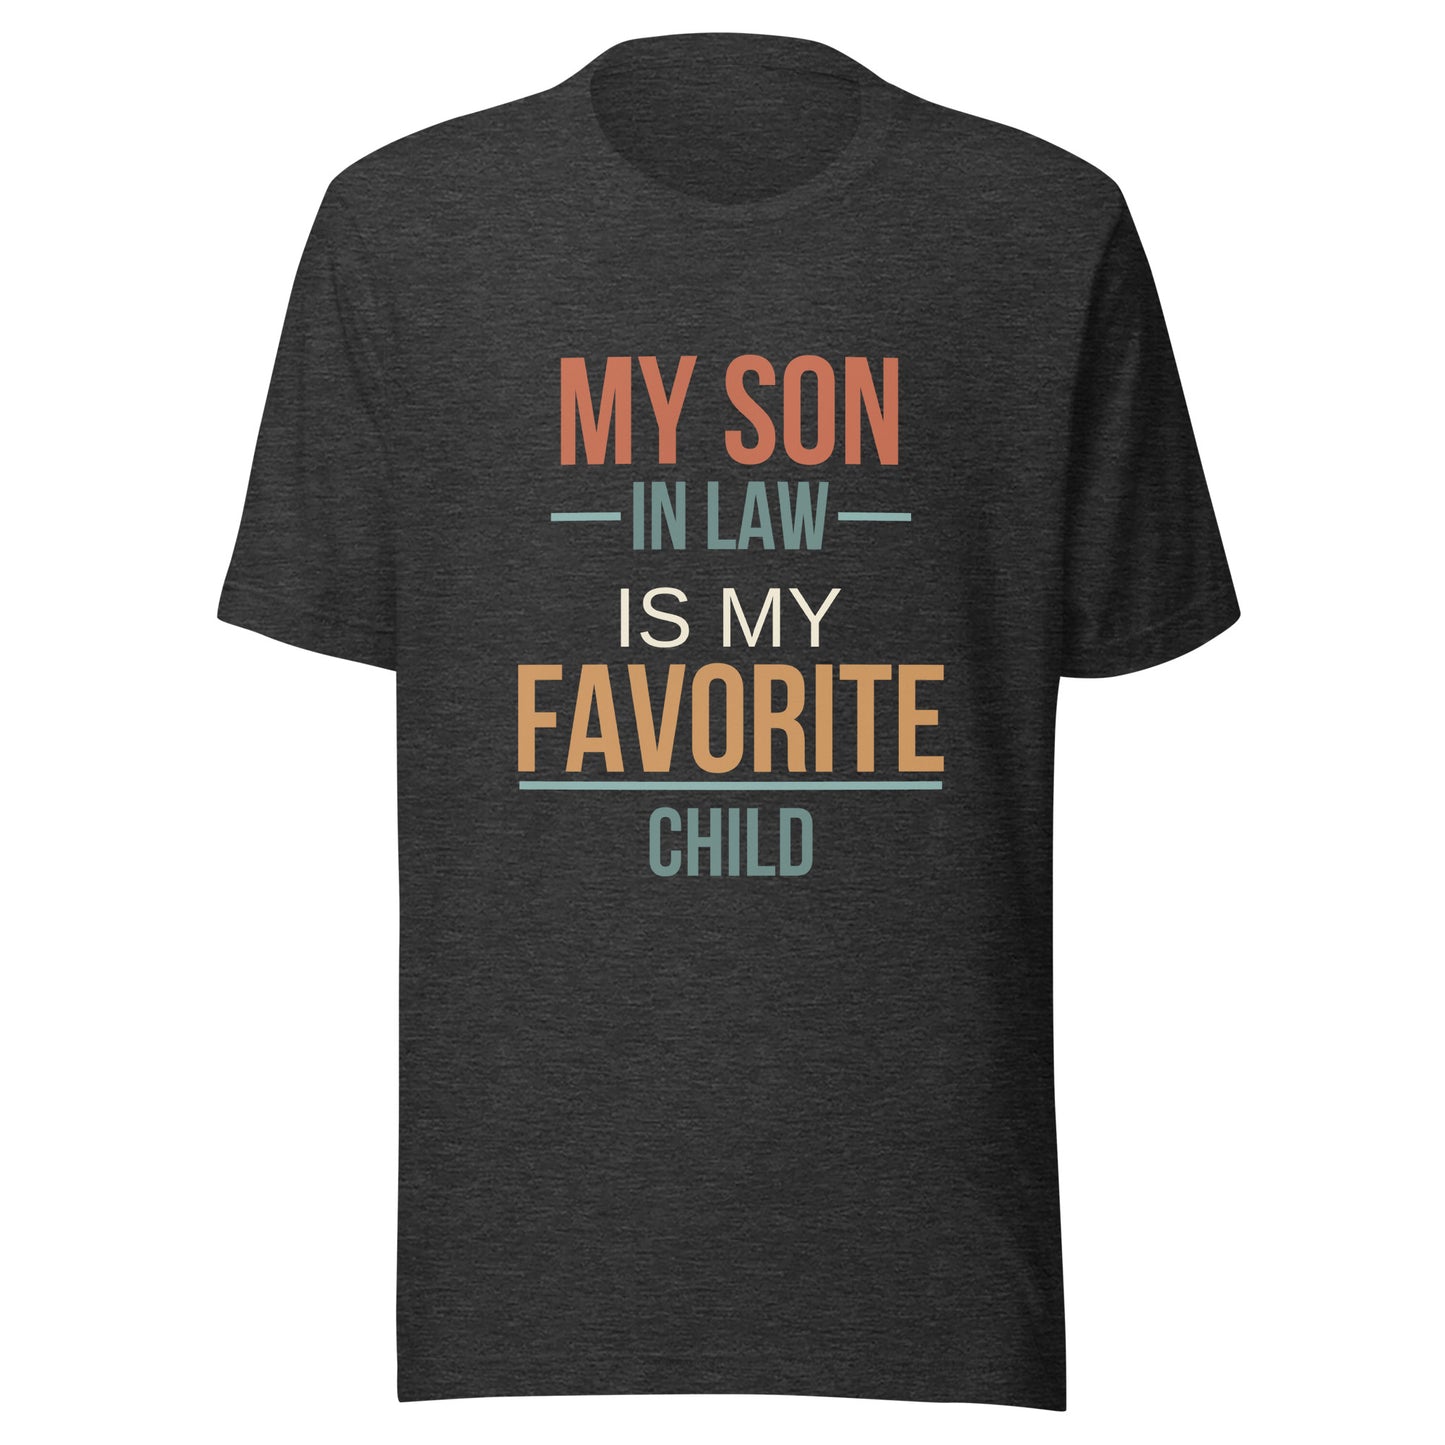 My Son In Law Is My Favorite Child T-shirt